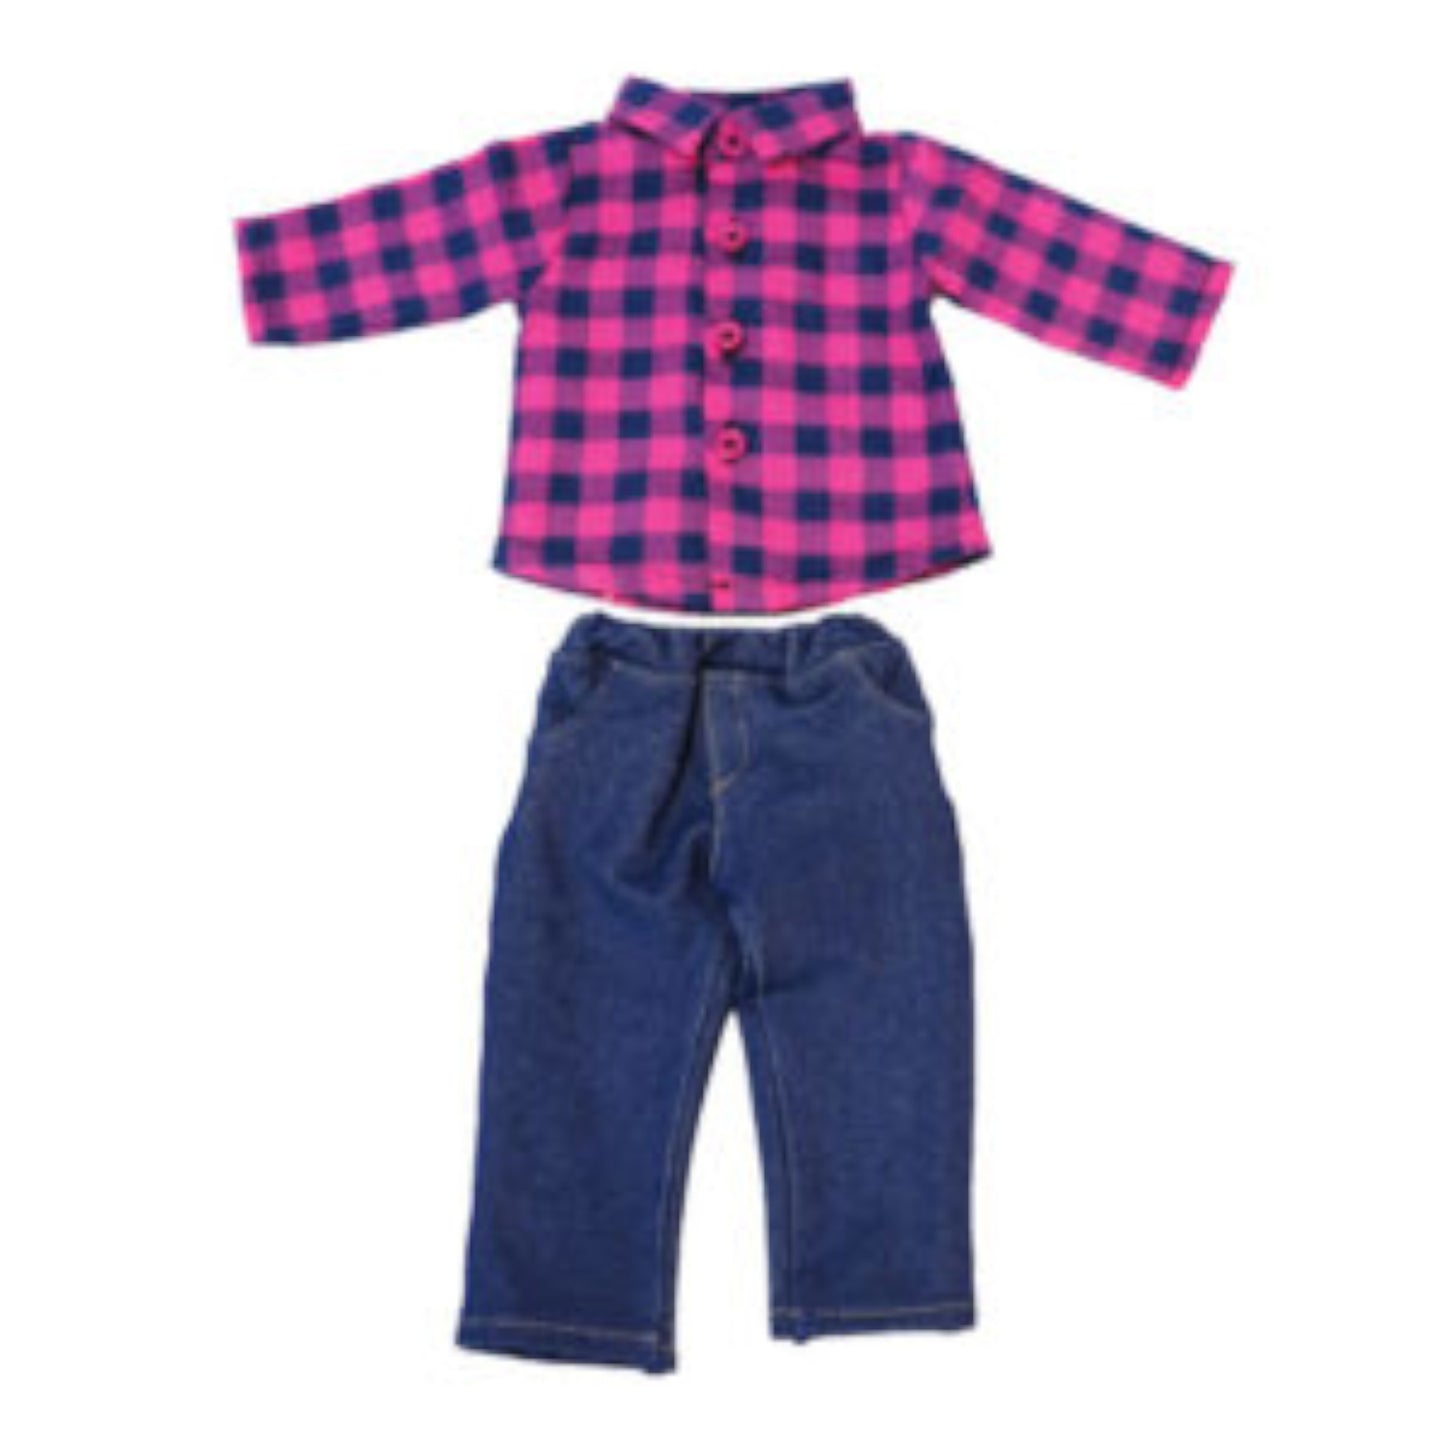 Navy and Pink Checkered Outfit for 14.5-inch dolls